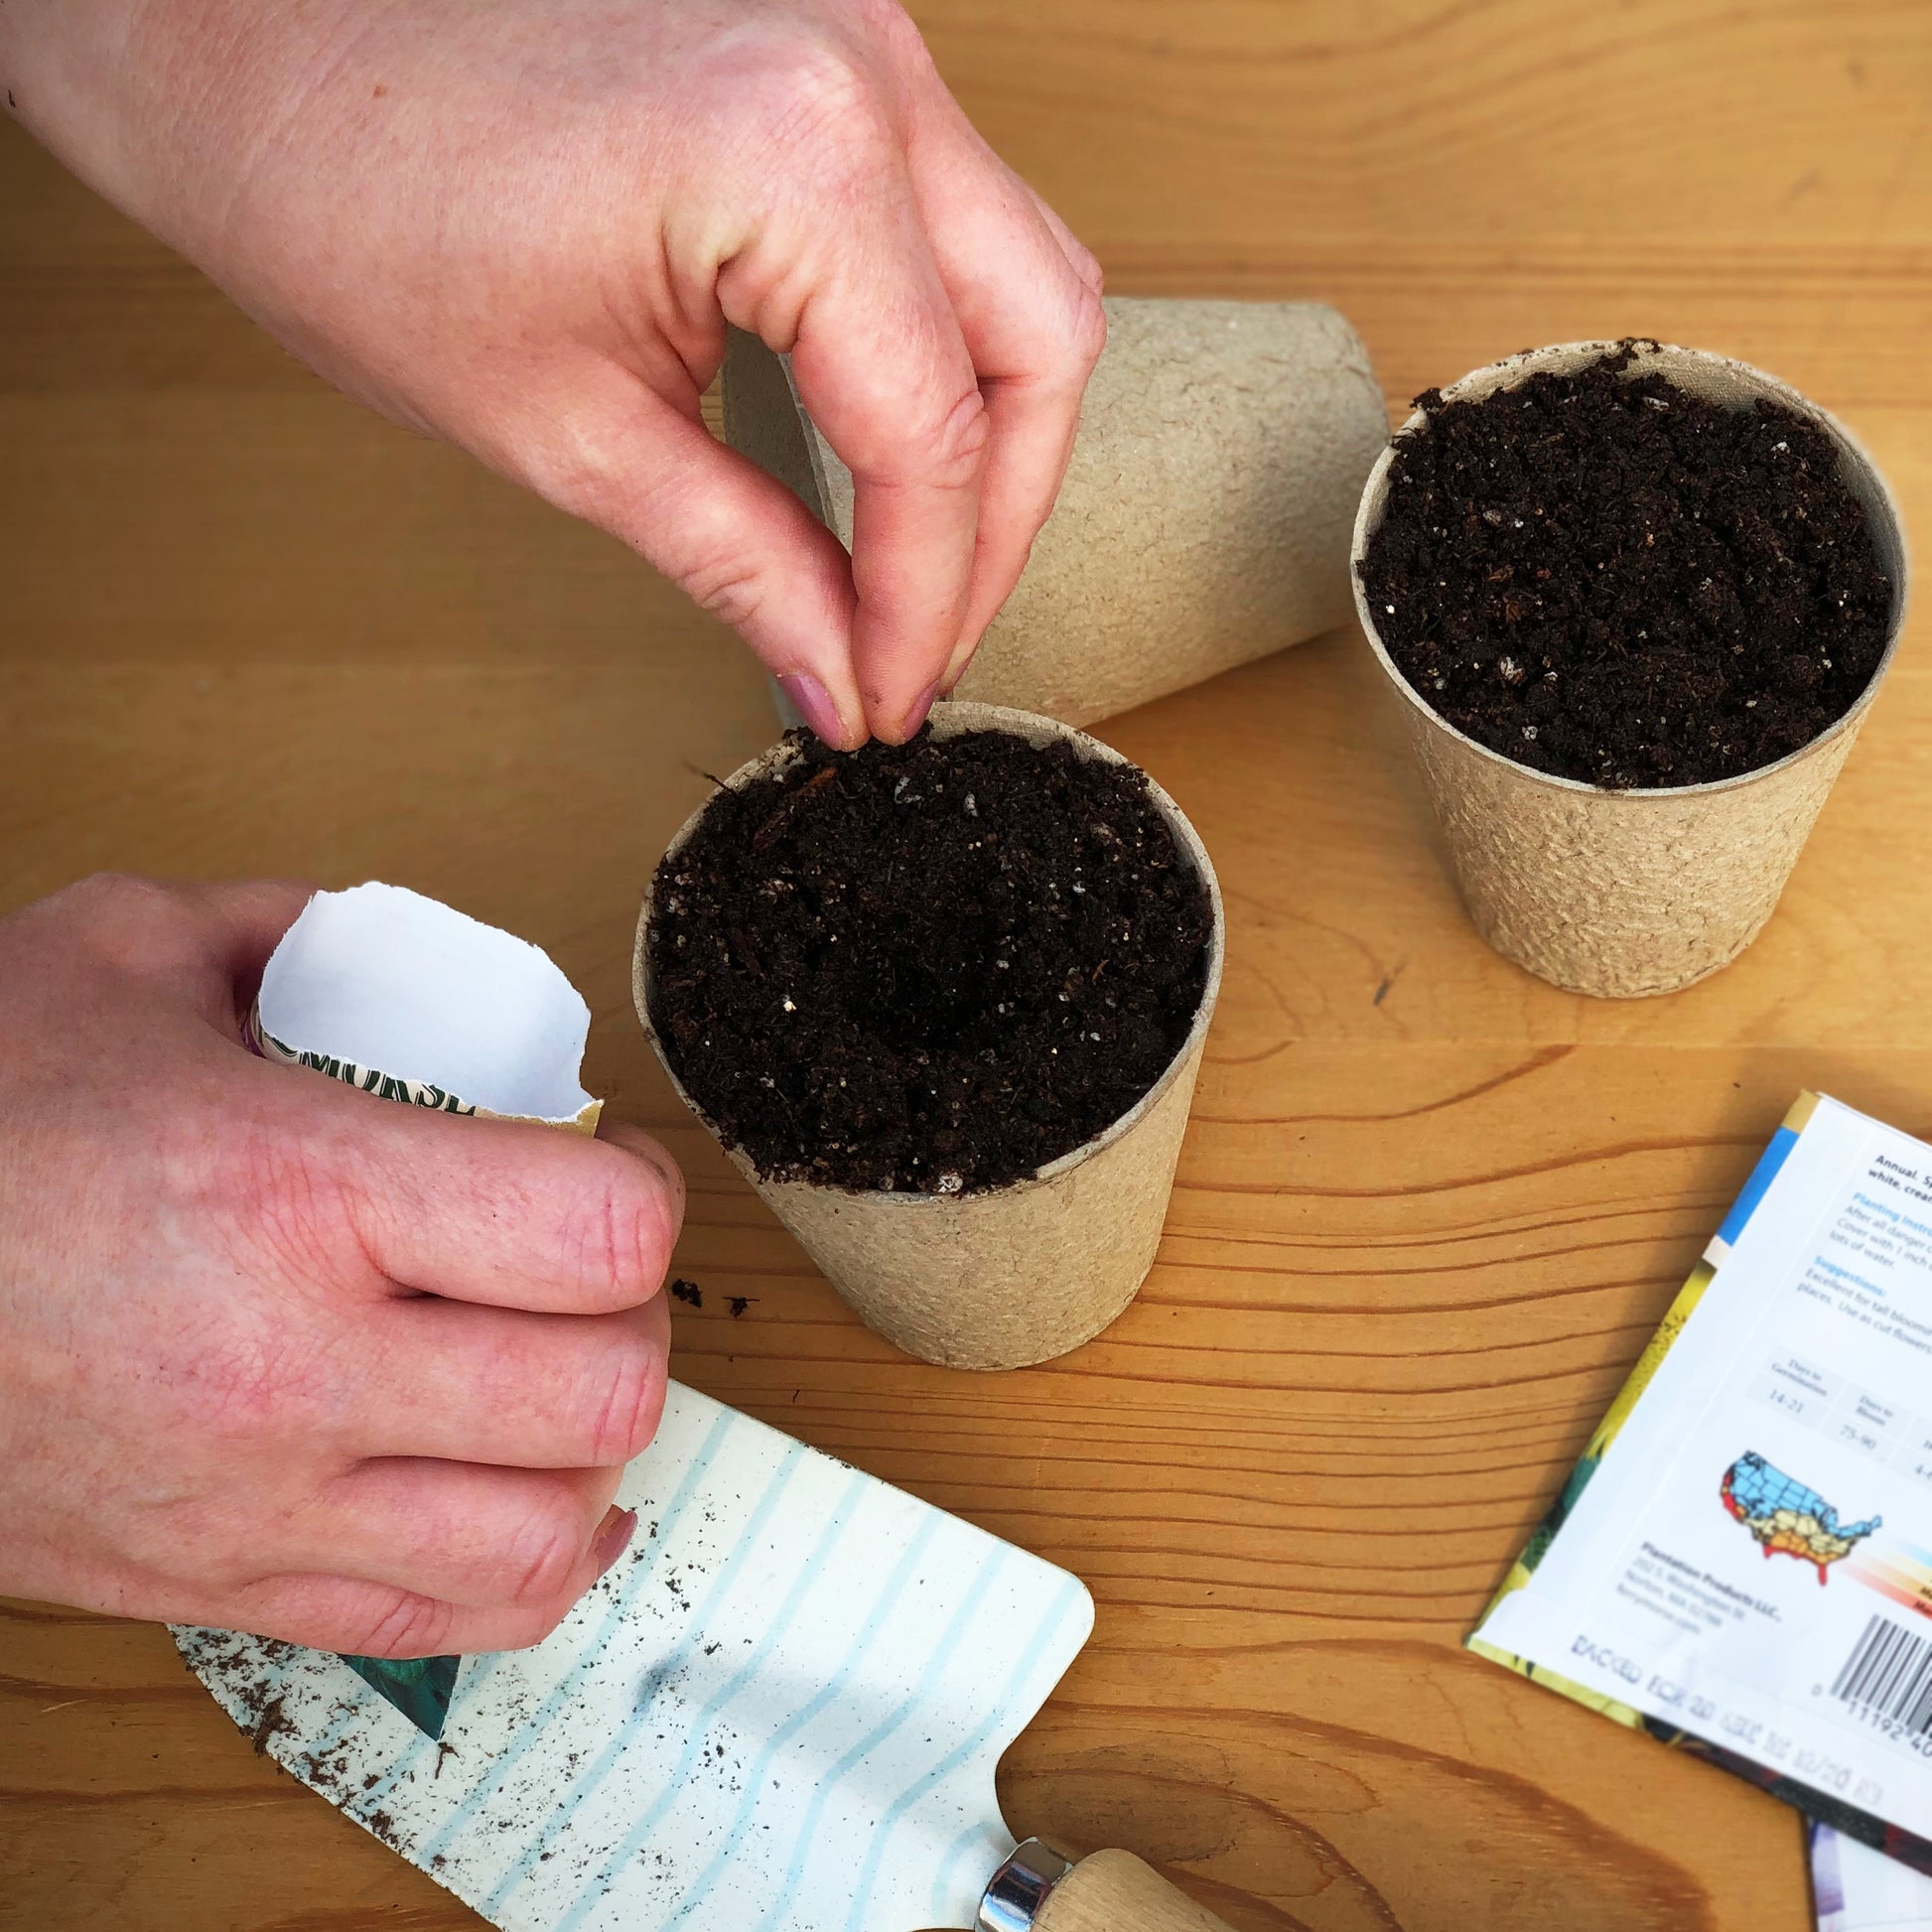 Start Canterbury Bells seeds in biodegradable paper or peat pots.